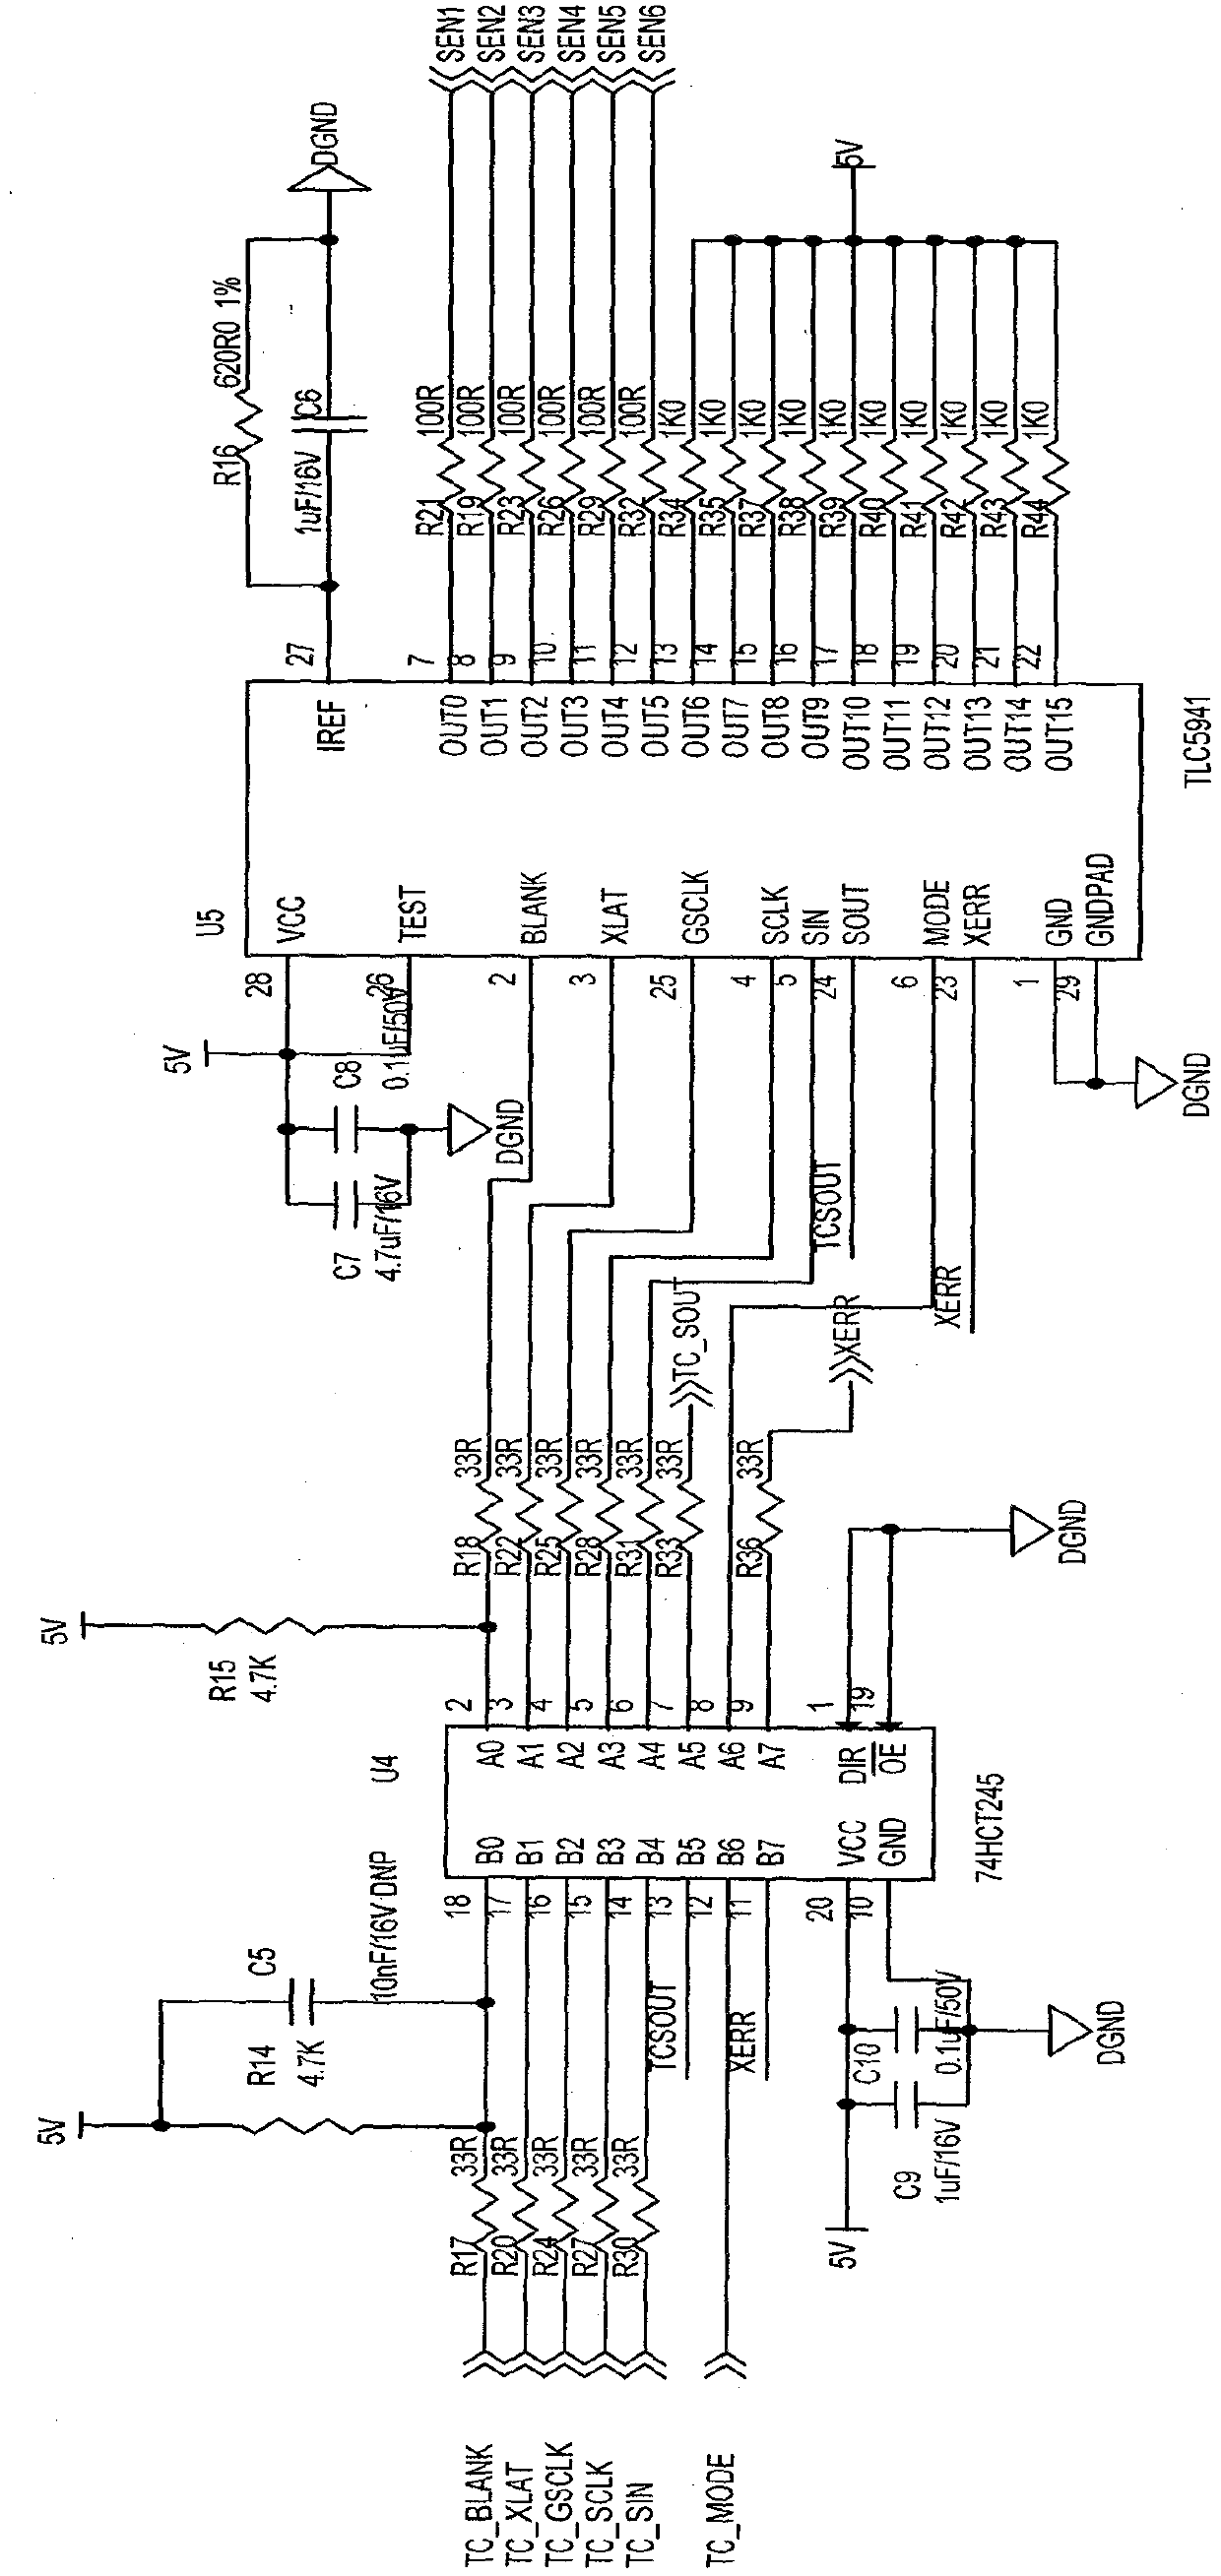 A transmitter drive circuit for a photoelectric sensor